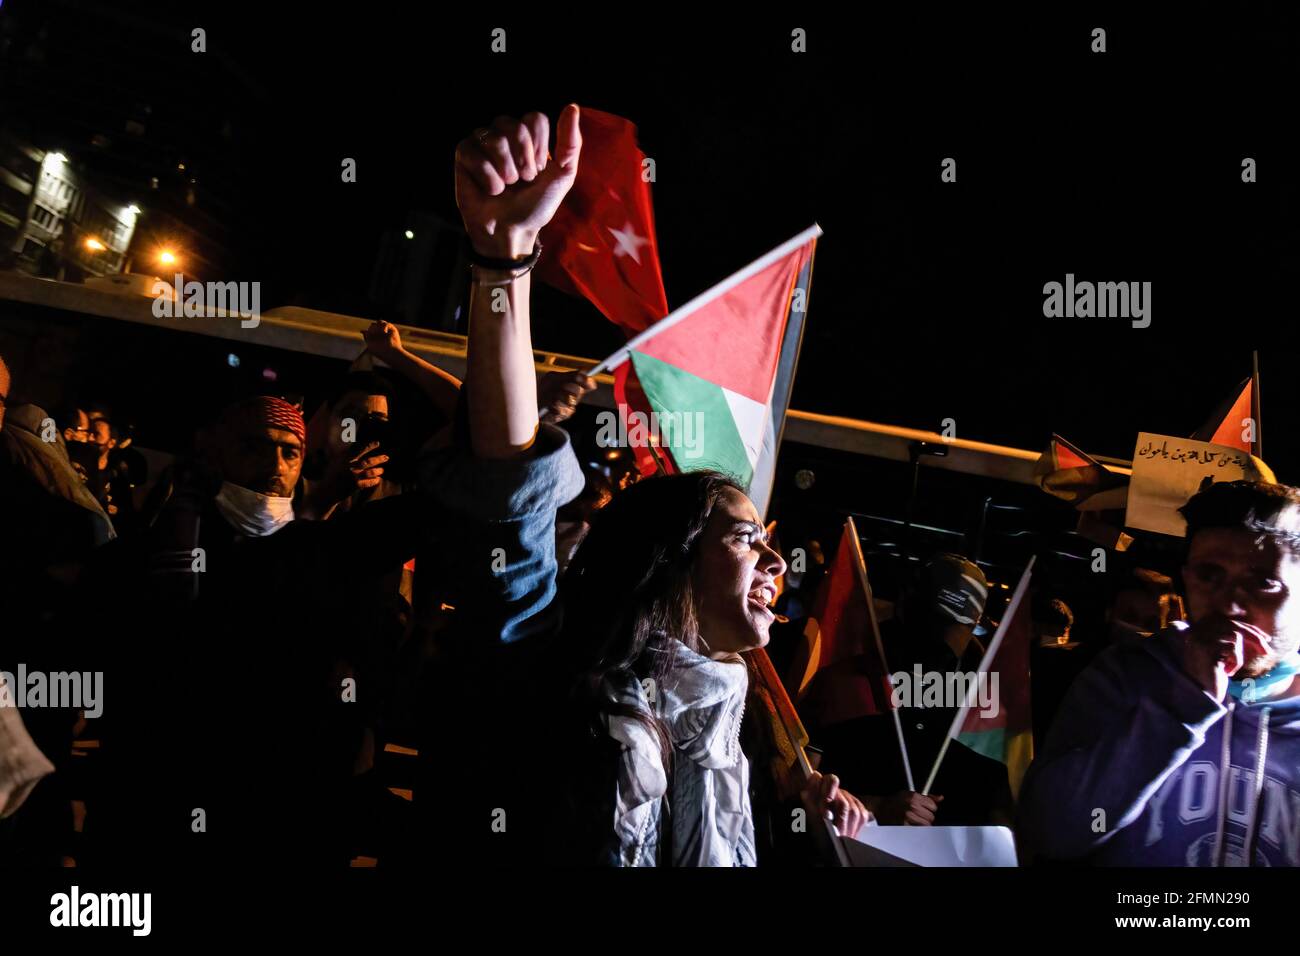 Ankara, Turkey. 10th May, 2021. A protester gestures during the demonstration. People gathered in front of the Israeli Embassy in Ankara to protest against the entry of Israeli security forces into Masjid al-Aqsa, which is considered a sacred place for Muslims. (Photo by Tunahan Turhan/SOPA Images/Sipa USA) Credit: Sipa USA/Alamy Live News Stock Photo